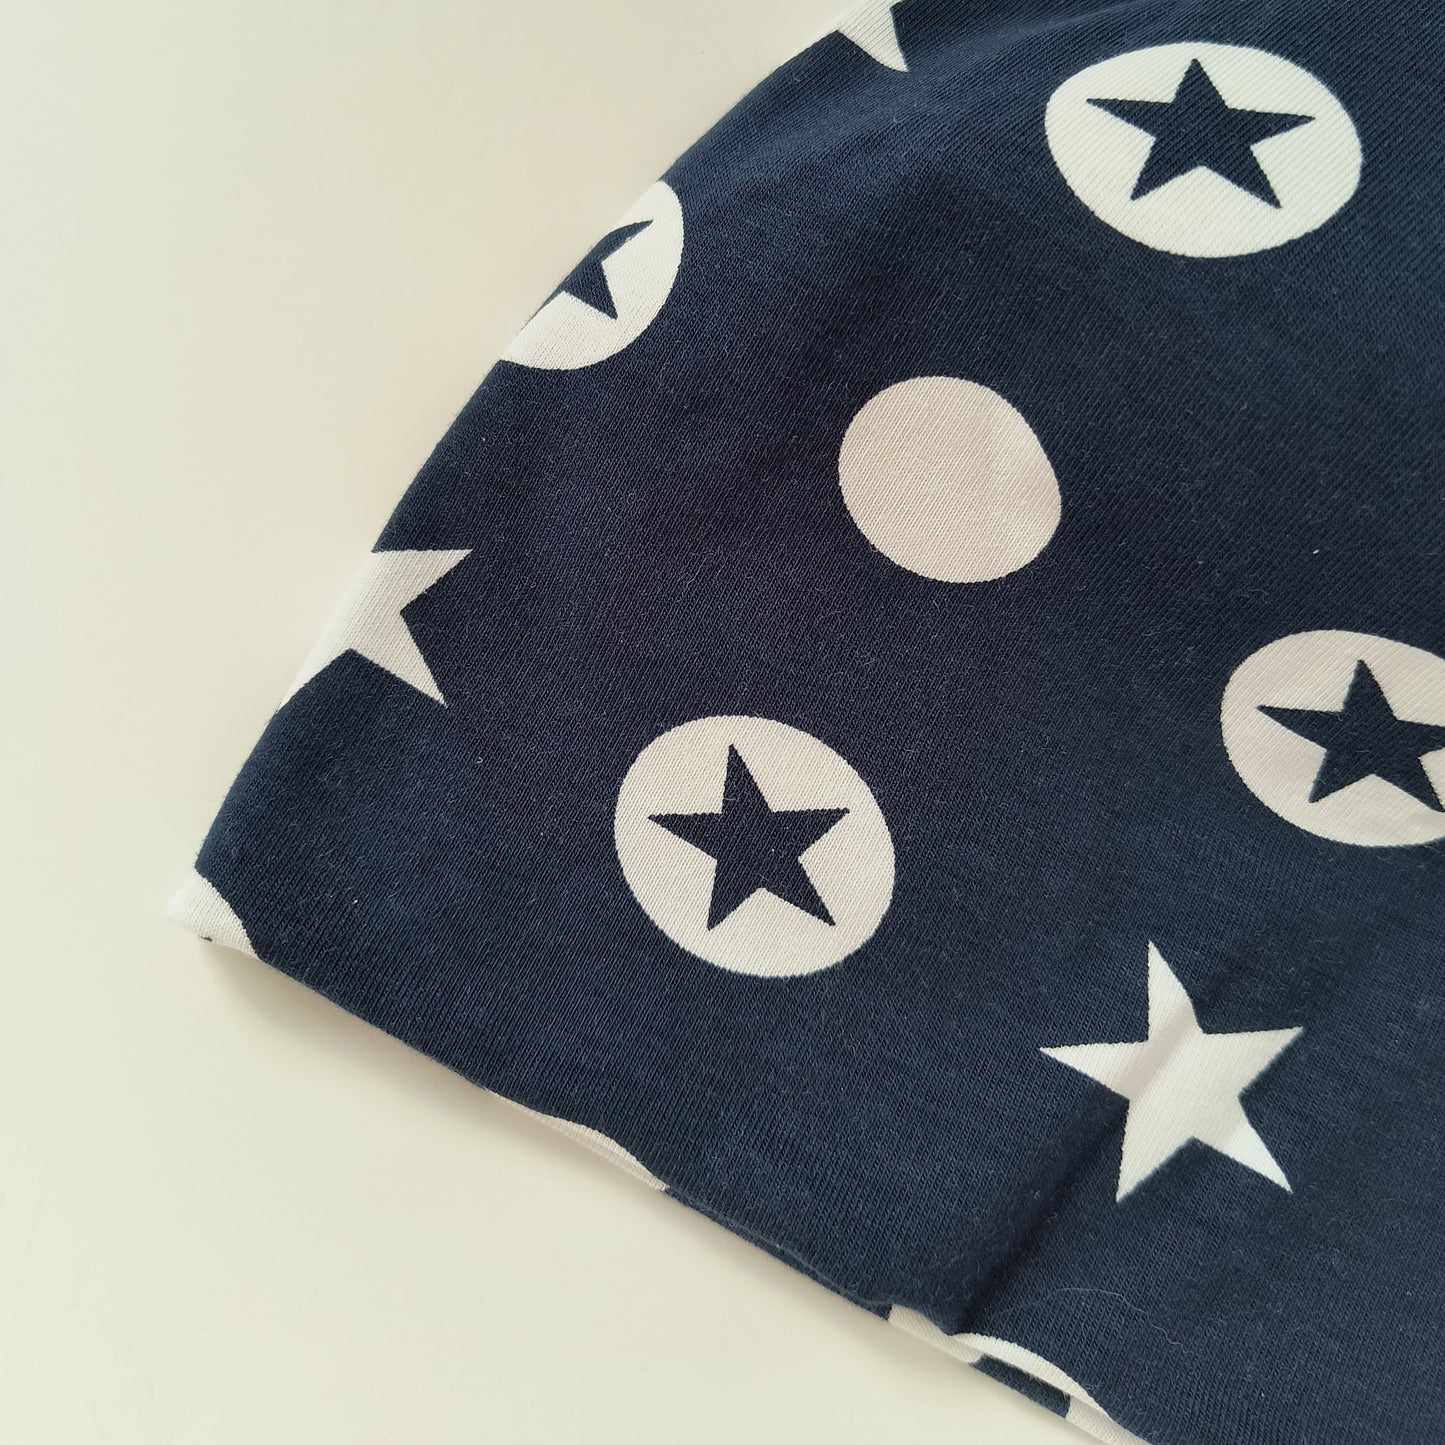 Baby beanie hat, navy stars, size EUR 48 cm head circumference/US 9-12 months (Handmade in Canada)